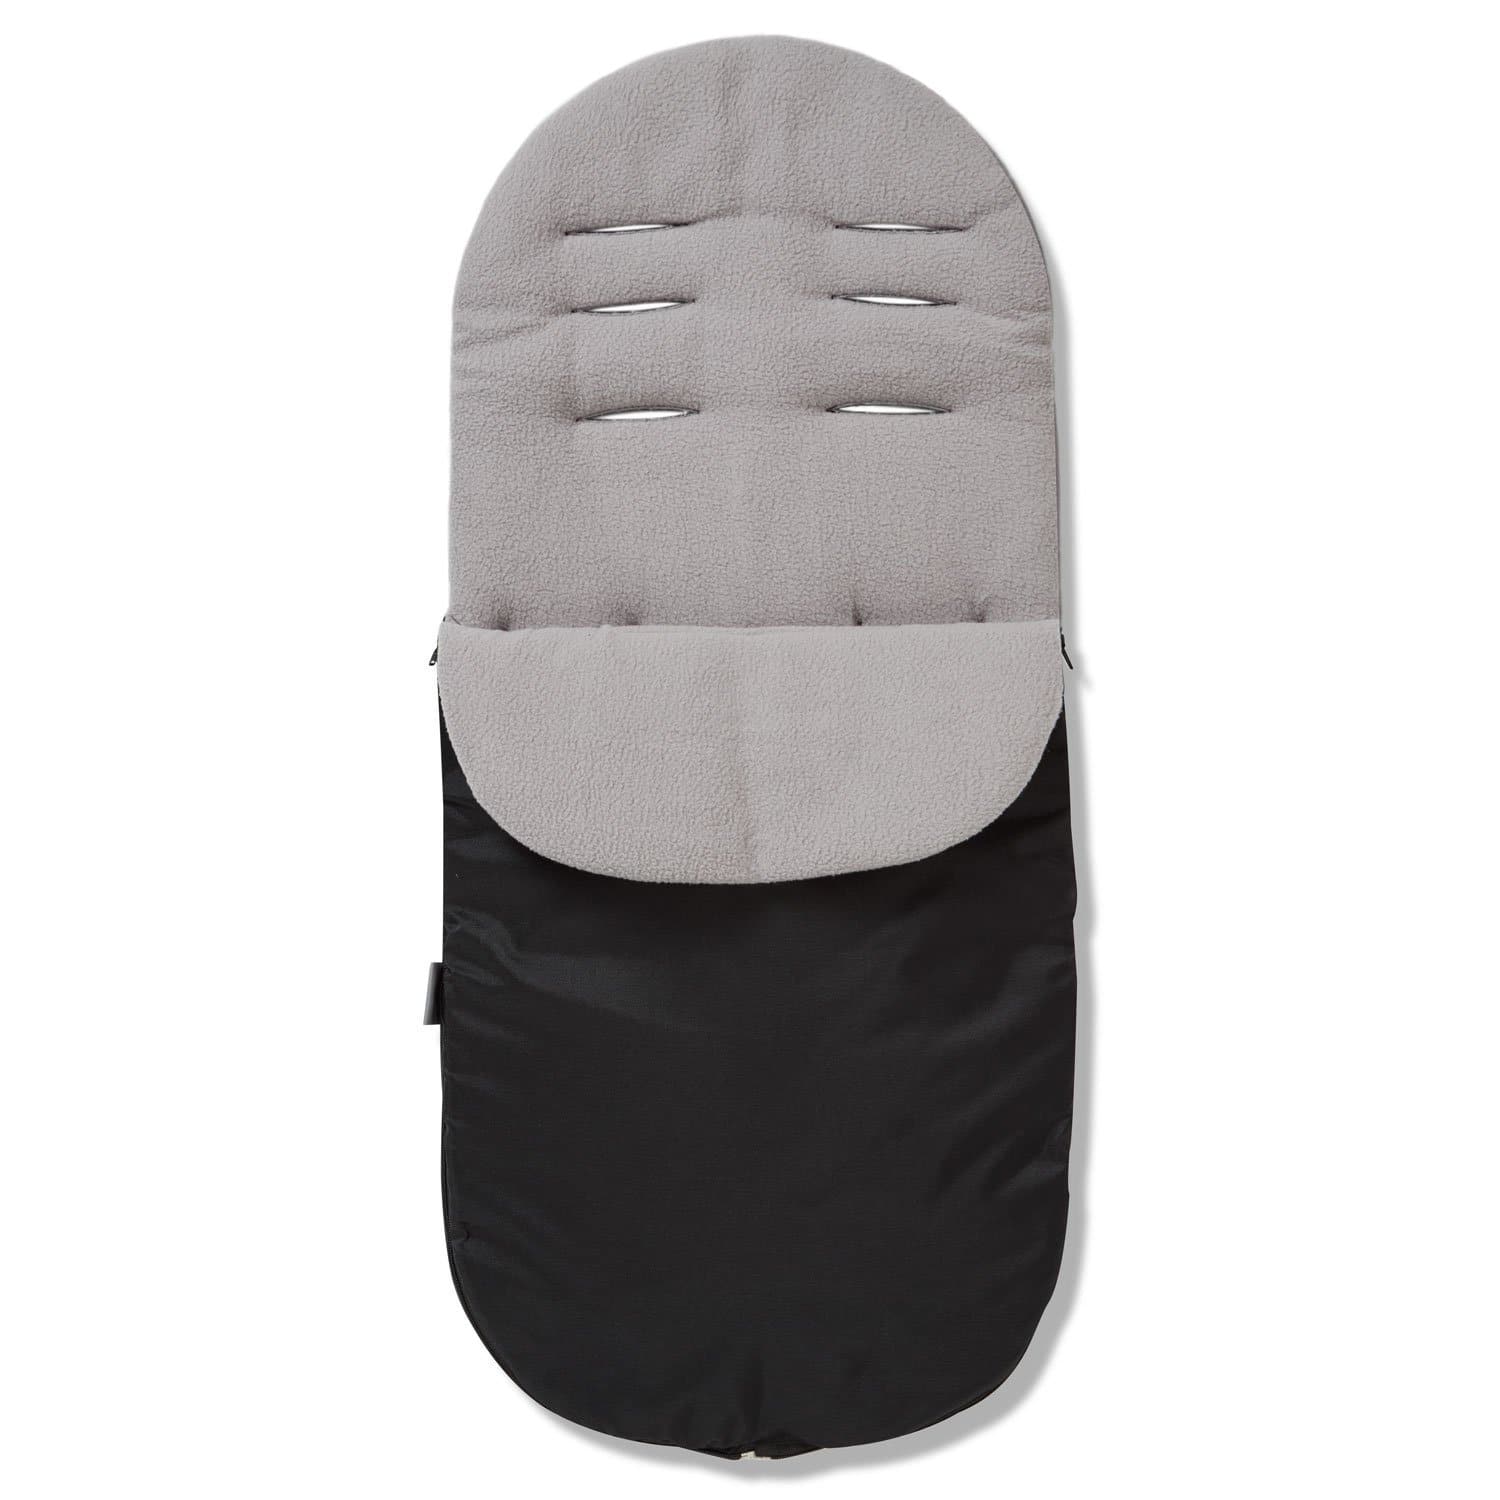 Footmuff / Cosy Toes Compatible with Bebecar Grey Fits All Models 